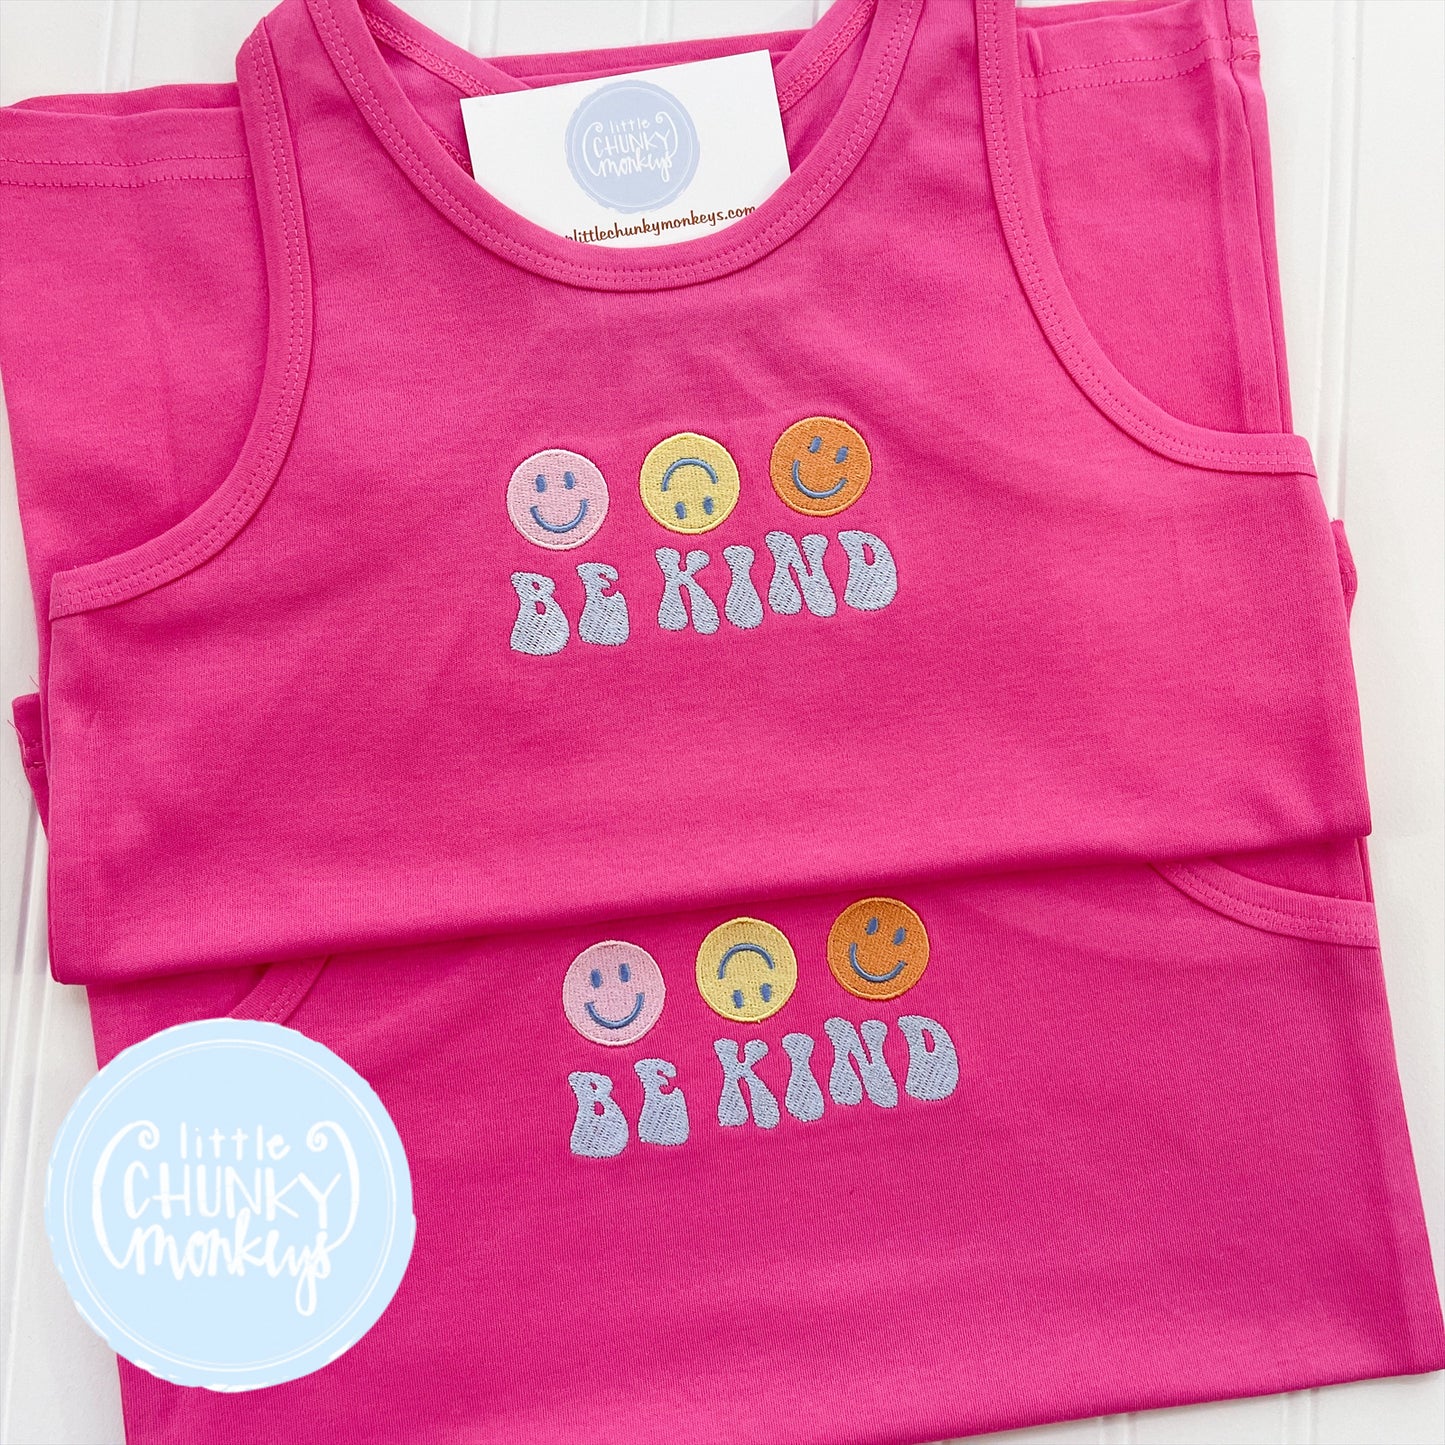 Girls Tank Top - Be Kind Smiley on Hot Pink